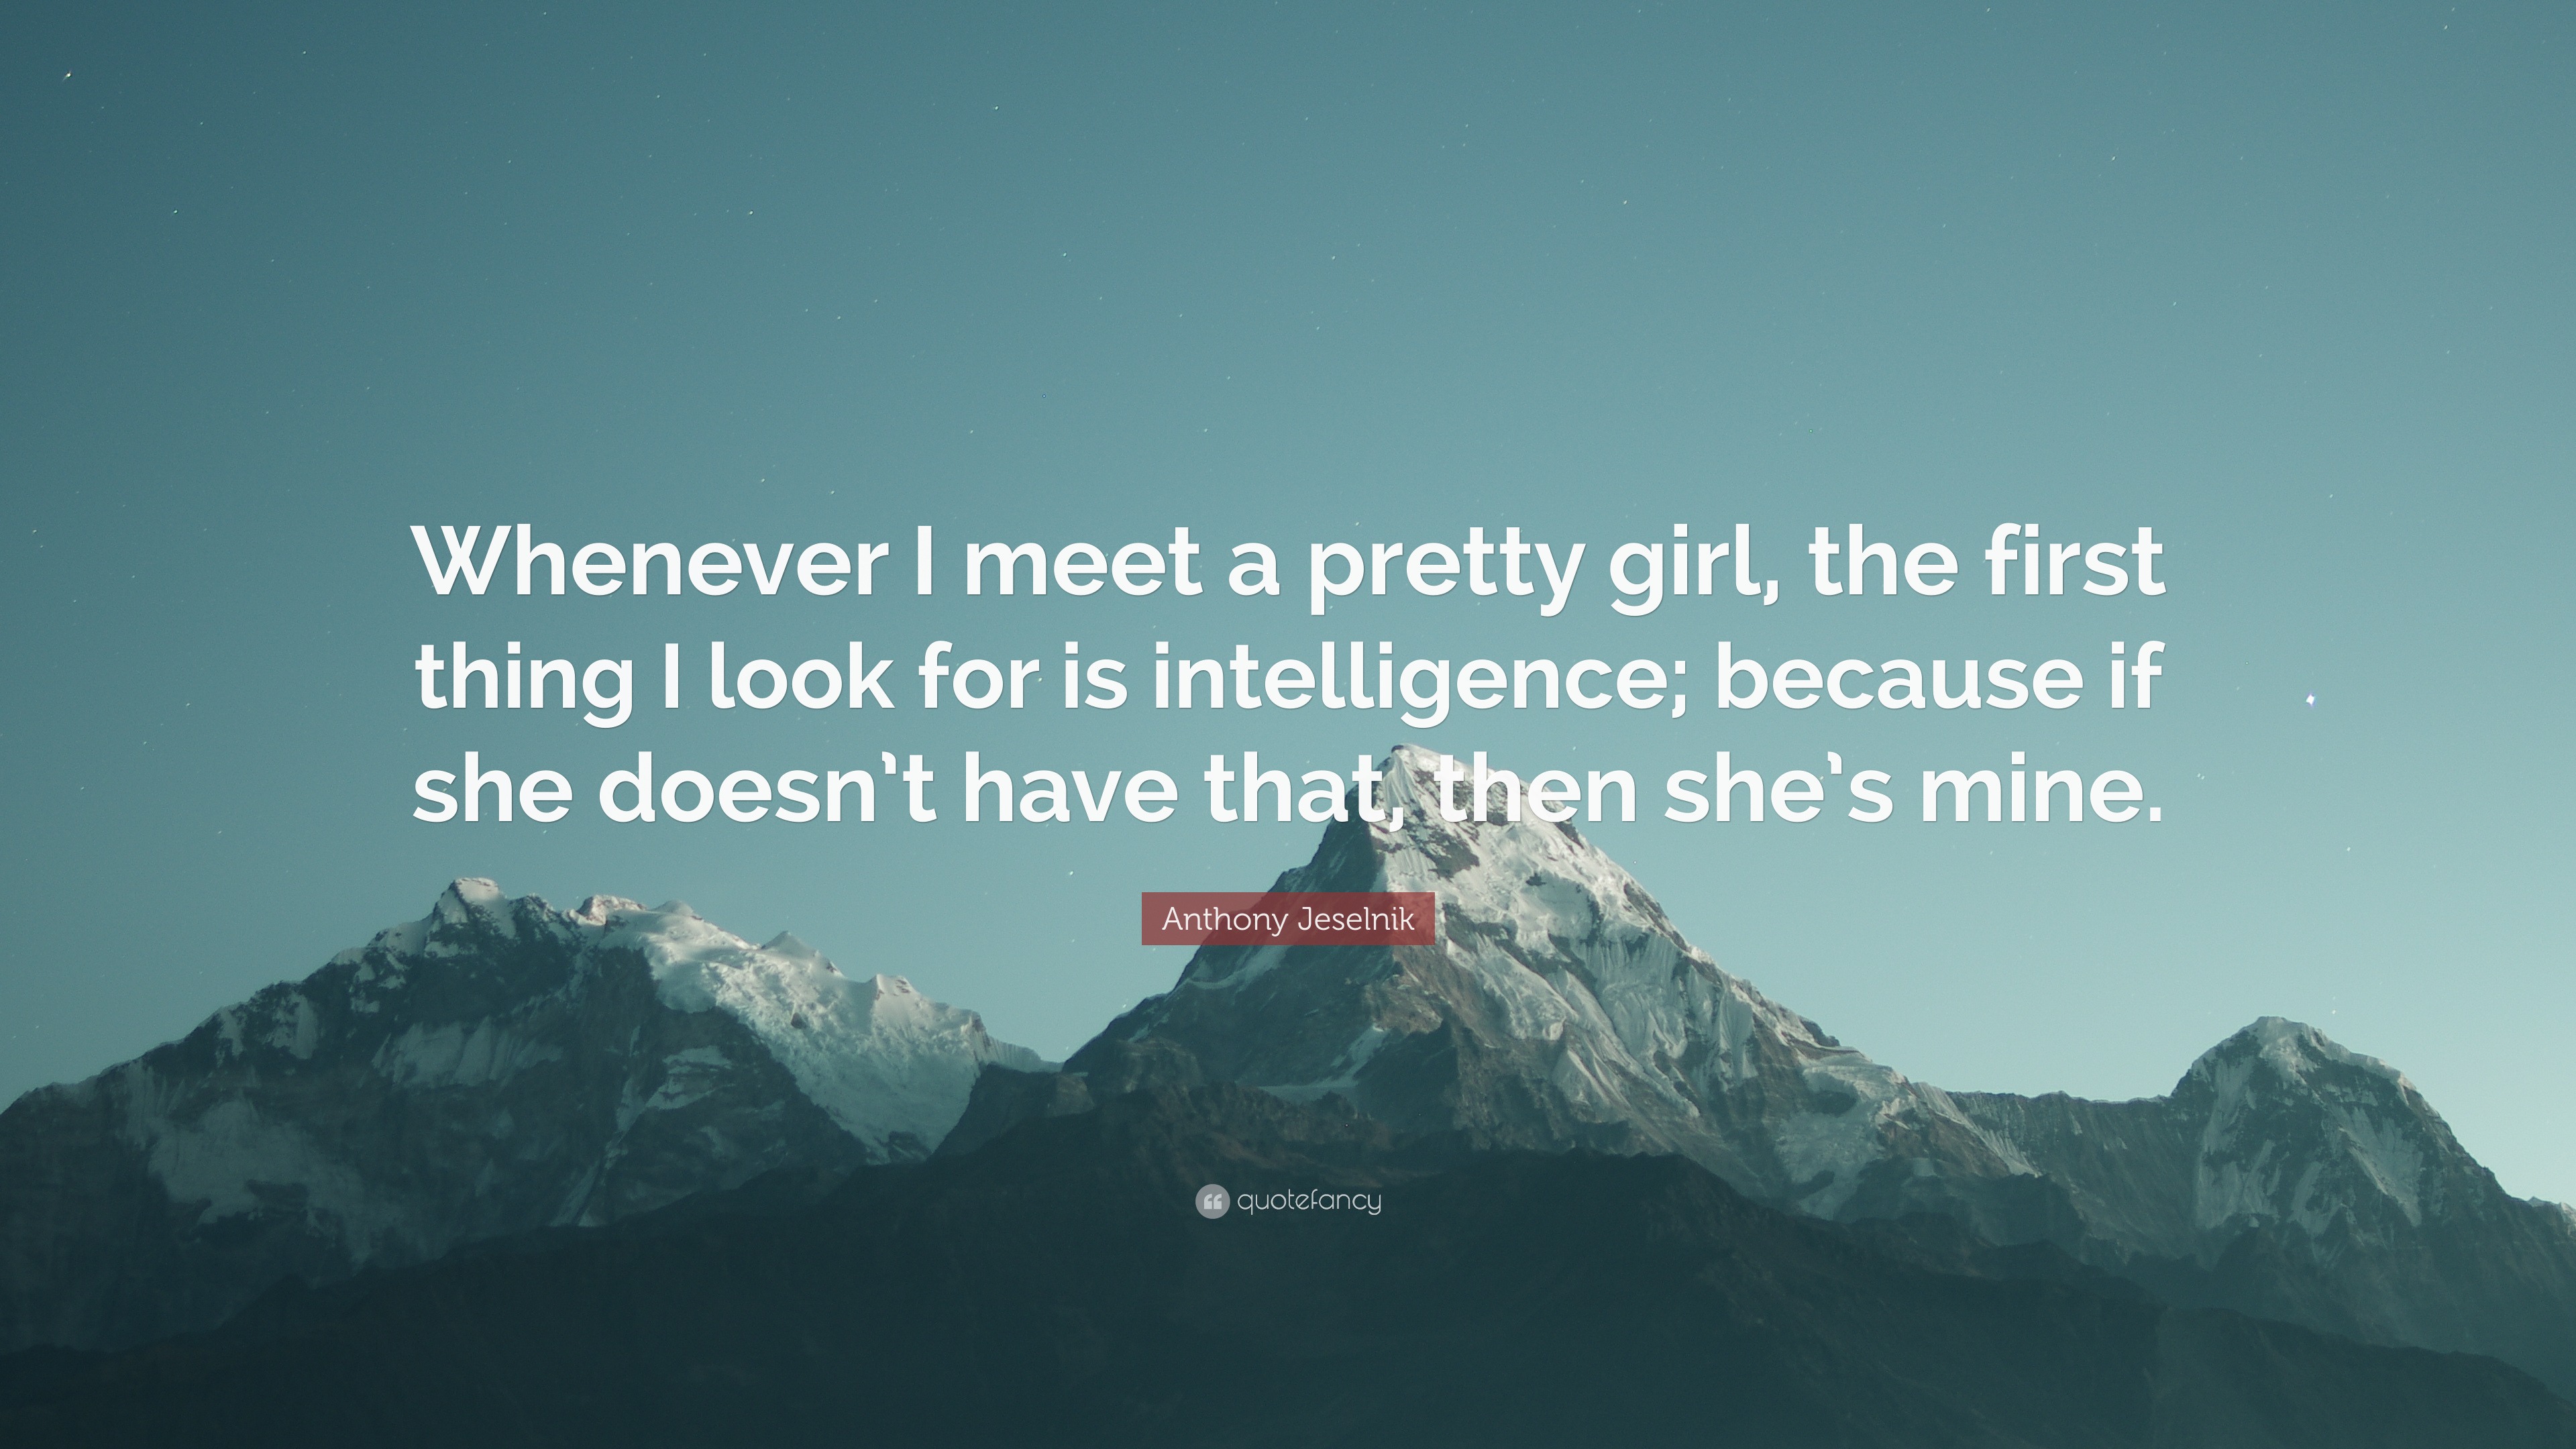 https://quotefancy.com/media/wallpaper/3840x2160/2927262-Anthony-Jeselnik-Quote-Whenever-I-meet-a-pretty-girl-the-first.jpg